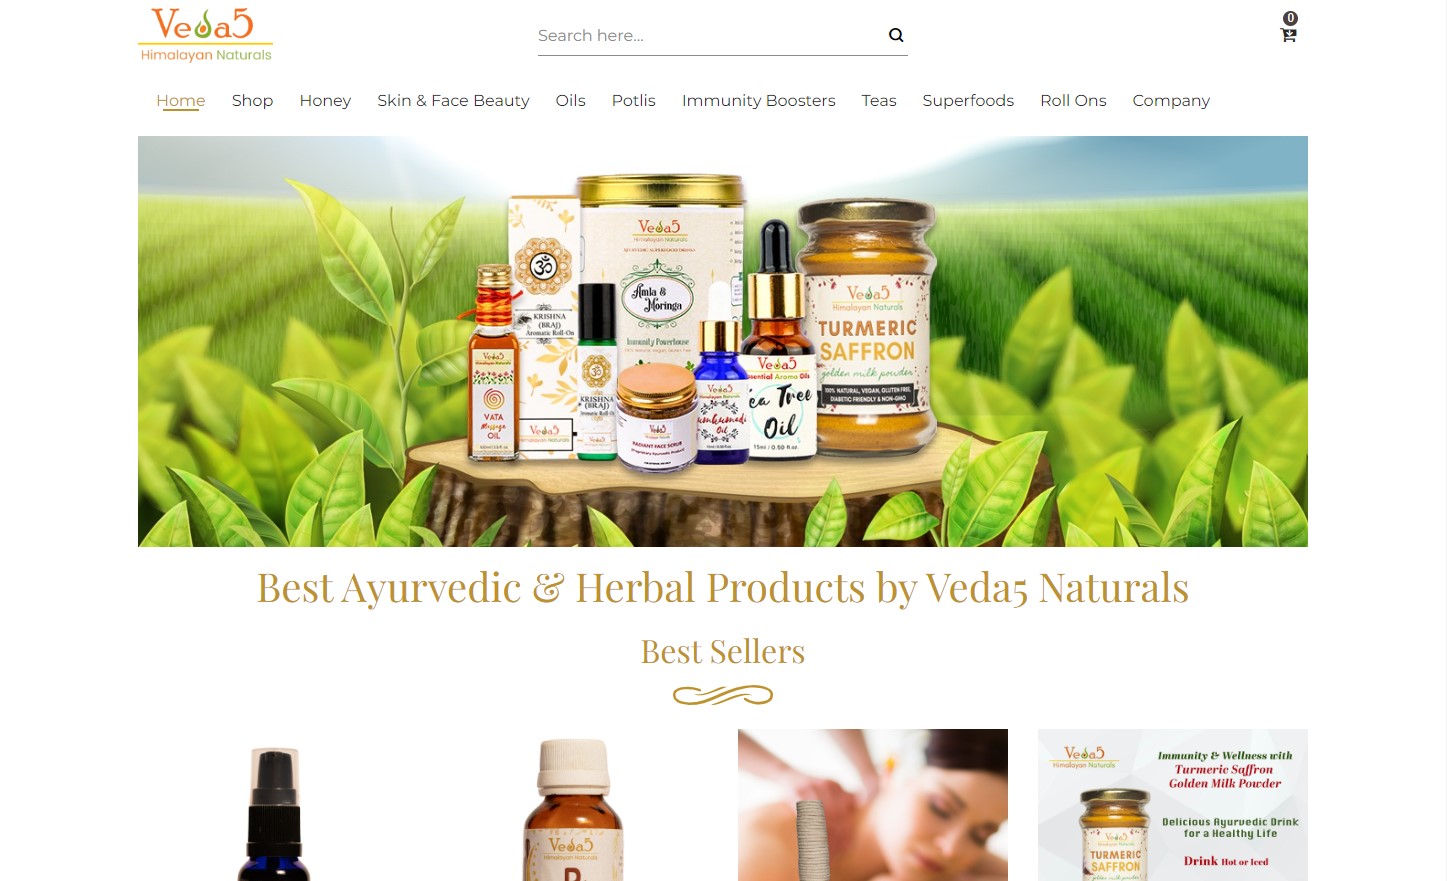 Digital Marketing & IT Client Veda5 Naturals - Website Design Graphic Design Video Editing E-Commerce Social Media SEO Ads Services by Karunamayi Holistic Inc. Canada USA UK India Europe World